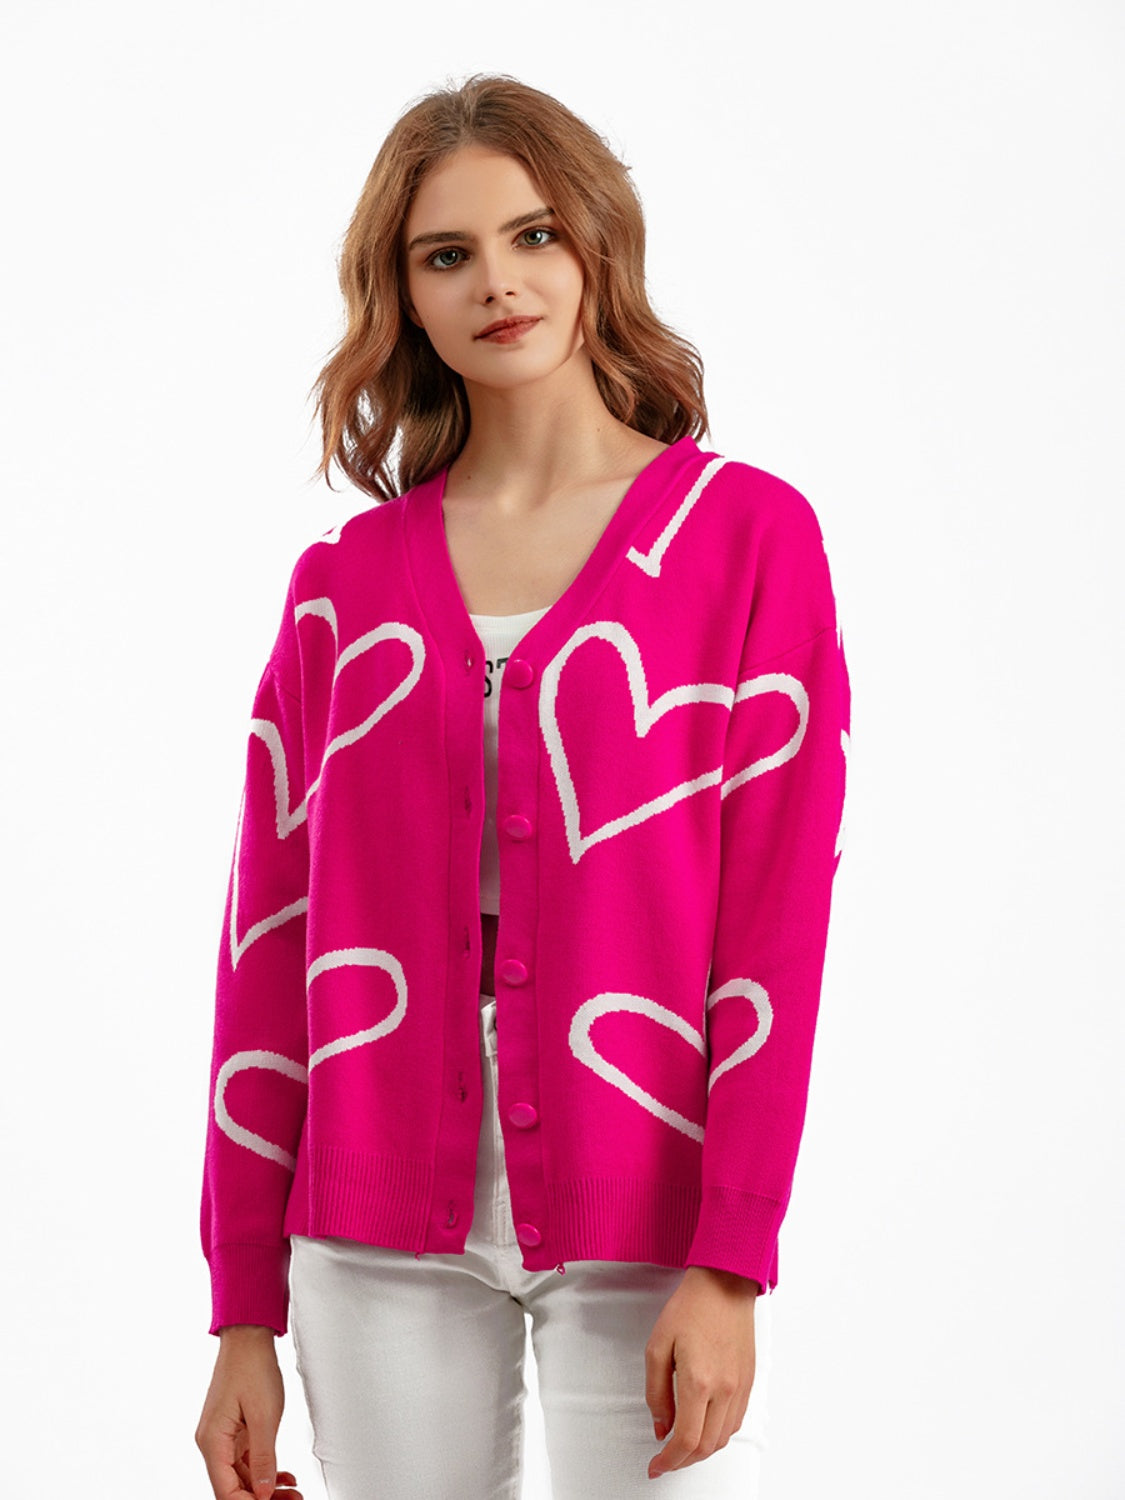 Heart Button Down Cardigan - Women’s Clothing & Accessories - Shirts & Tops - 3 - 2024